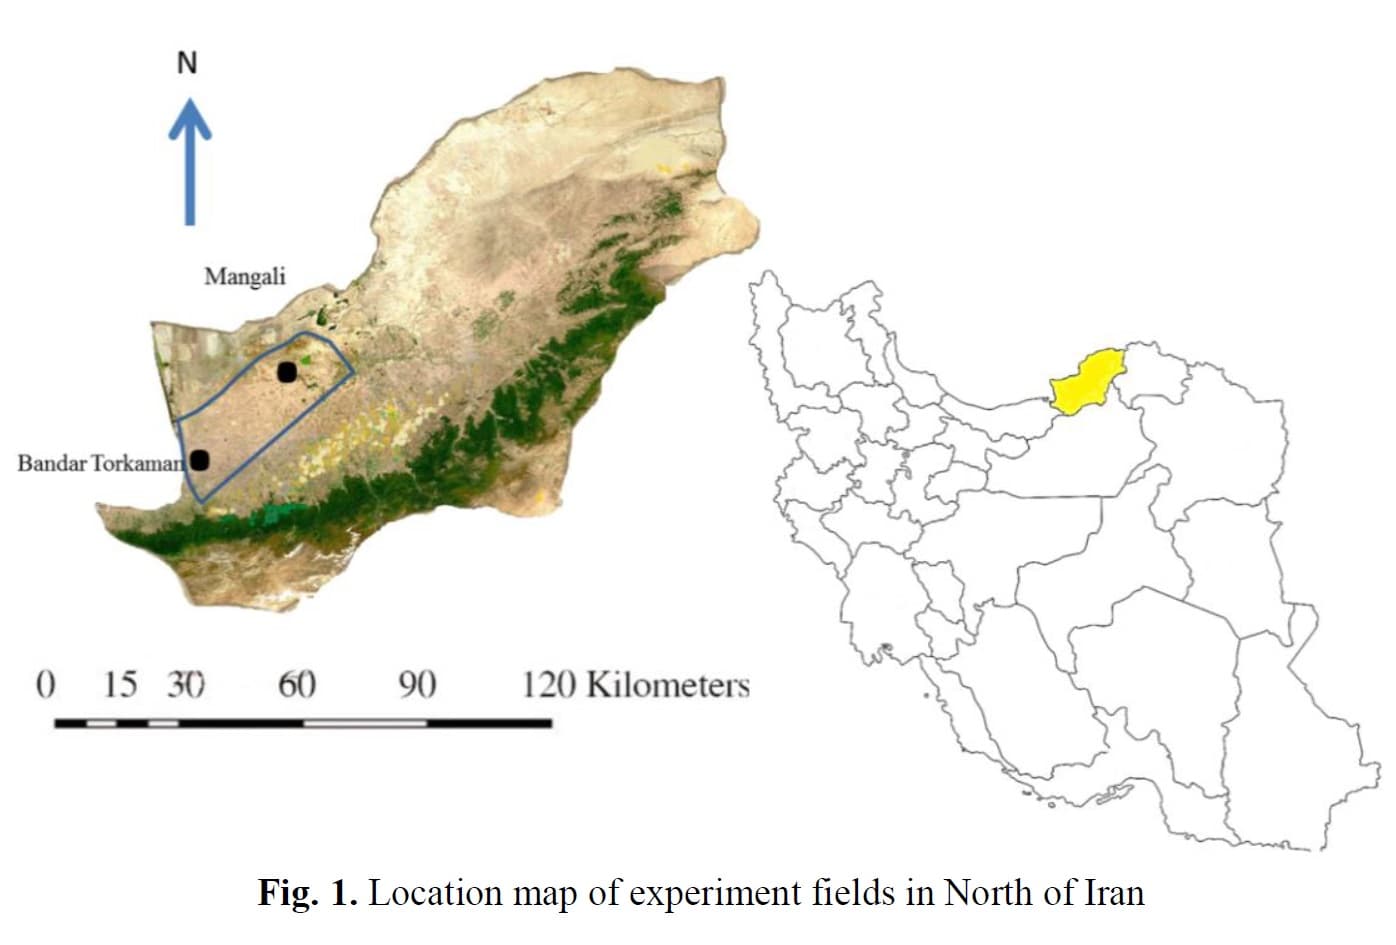 Investigation of Feasibility and Effect of Alternative Farming System on the Grain Yield of Barley and Forage Production in Western Semi-arid Region of Golestan Province, Iran